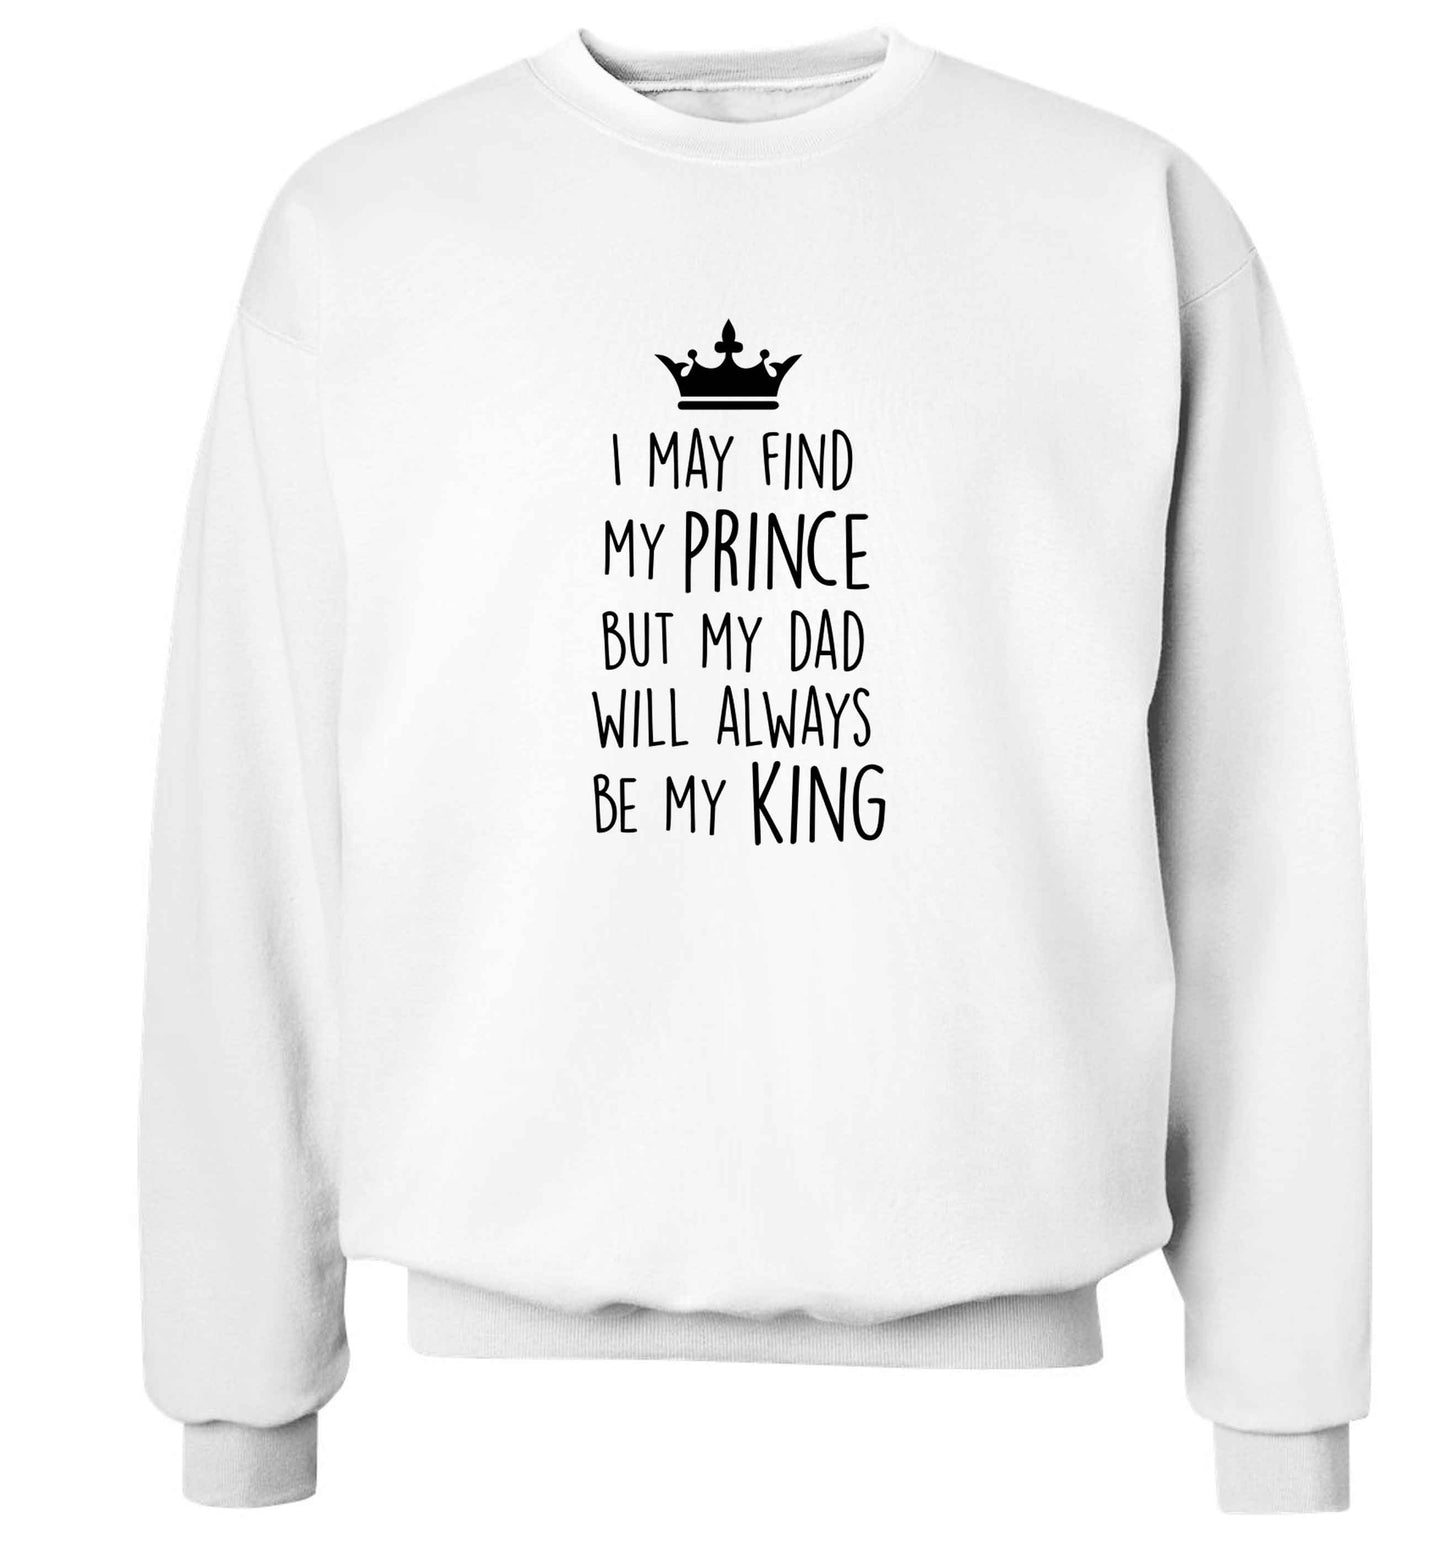 I may find my prince but my dad will always be my king adult's unisex white sweater 2XL